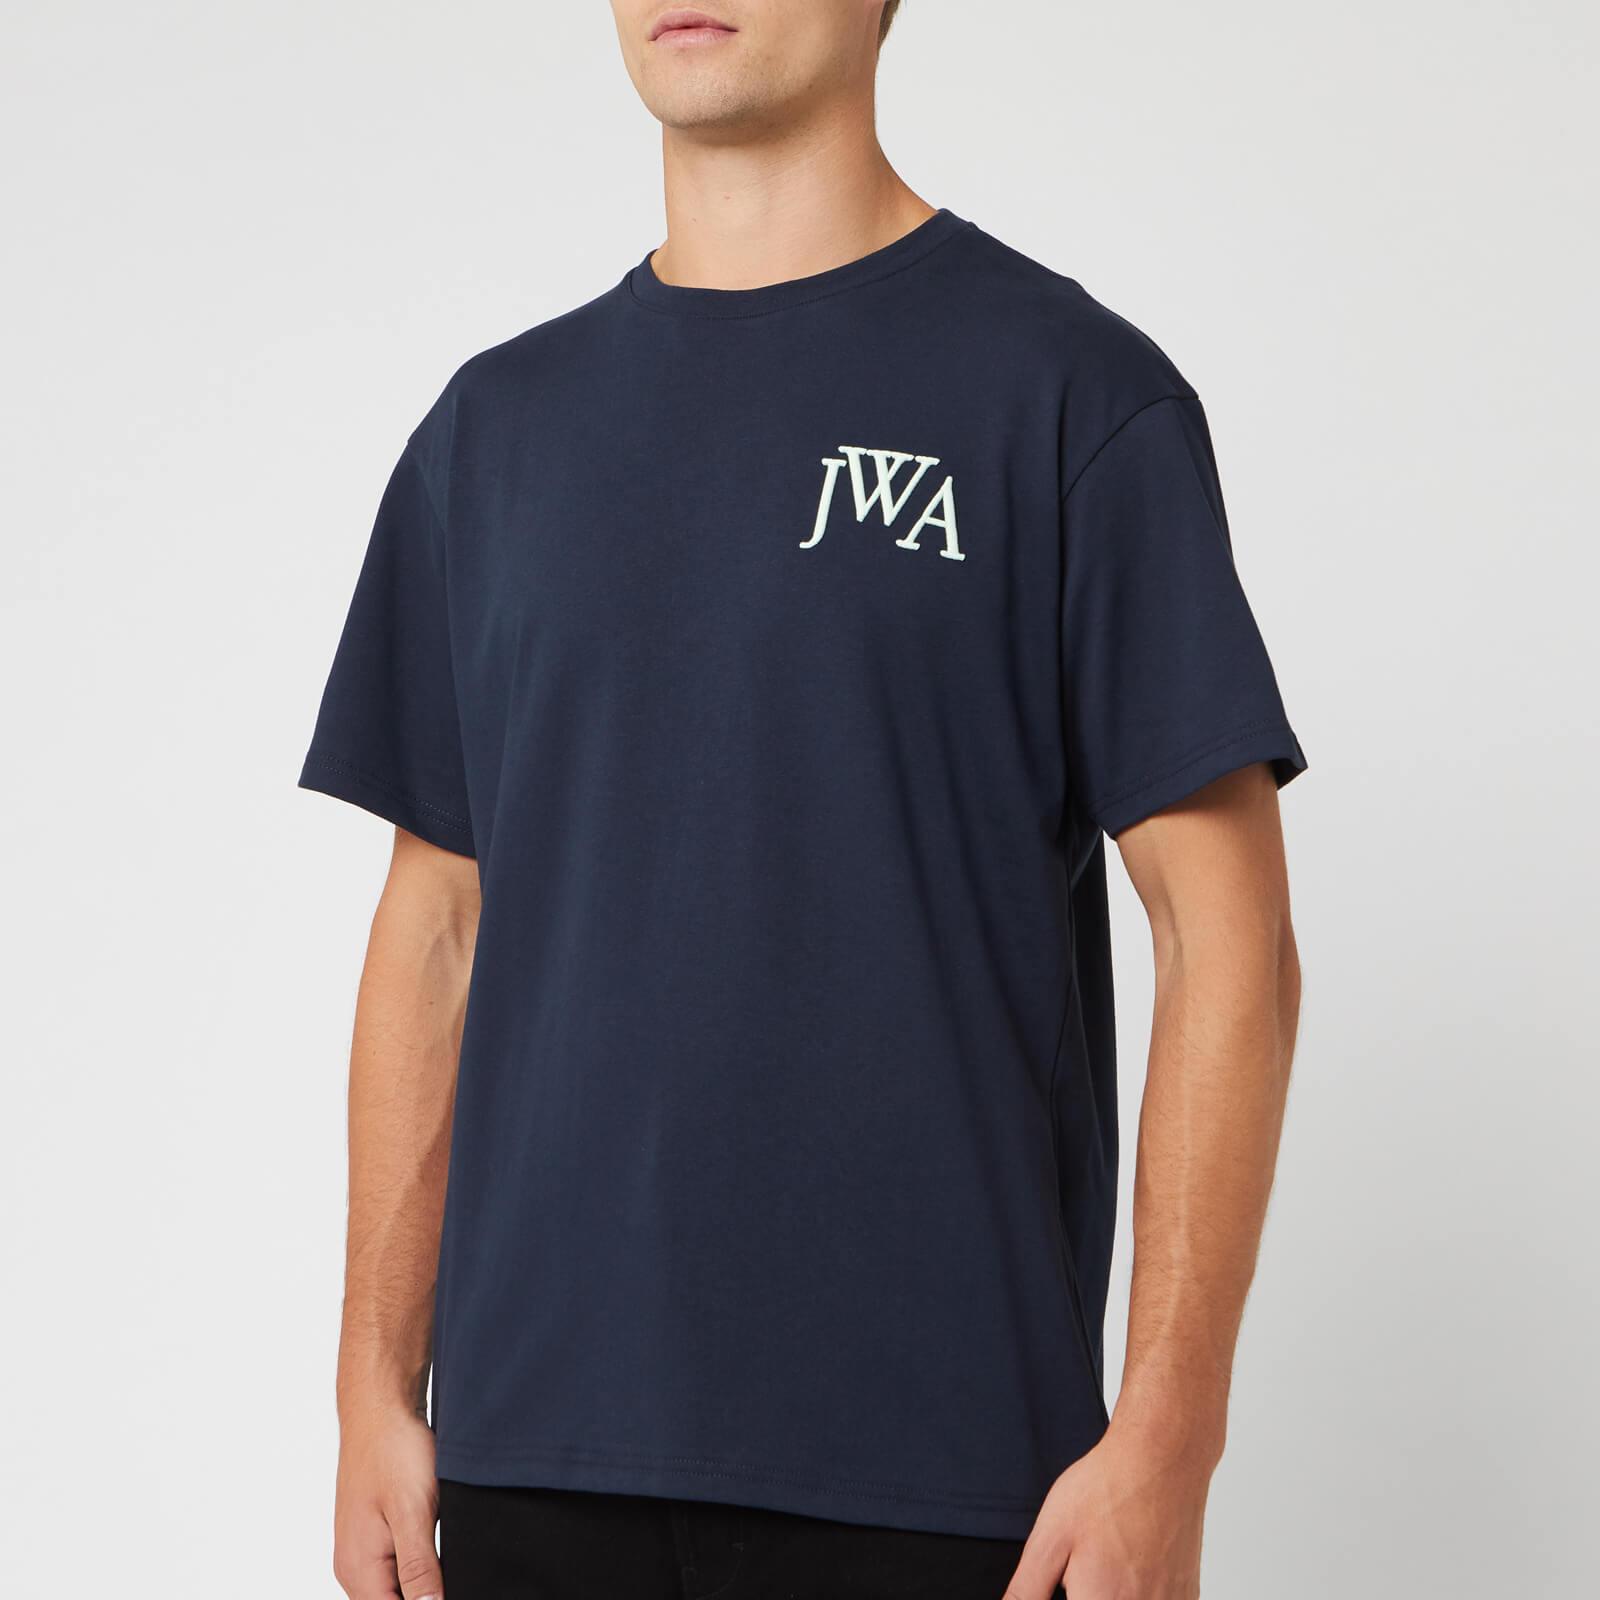 JW Anderson Jwa Embroidery Logo T-shirt in Blue for Men - Lyst